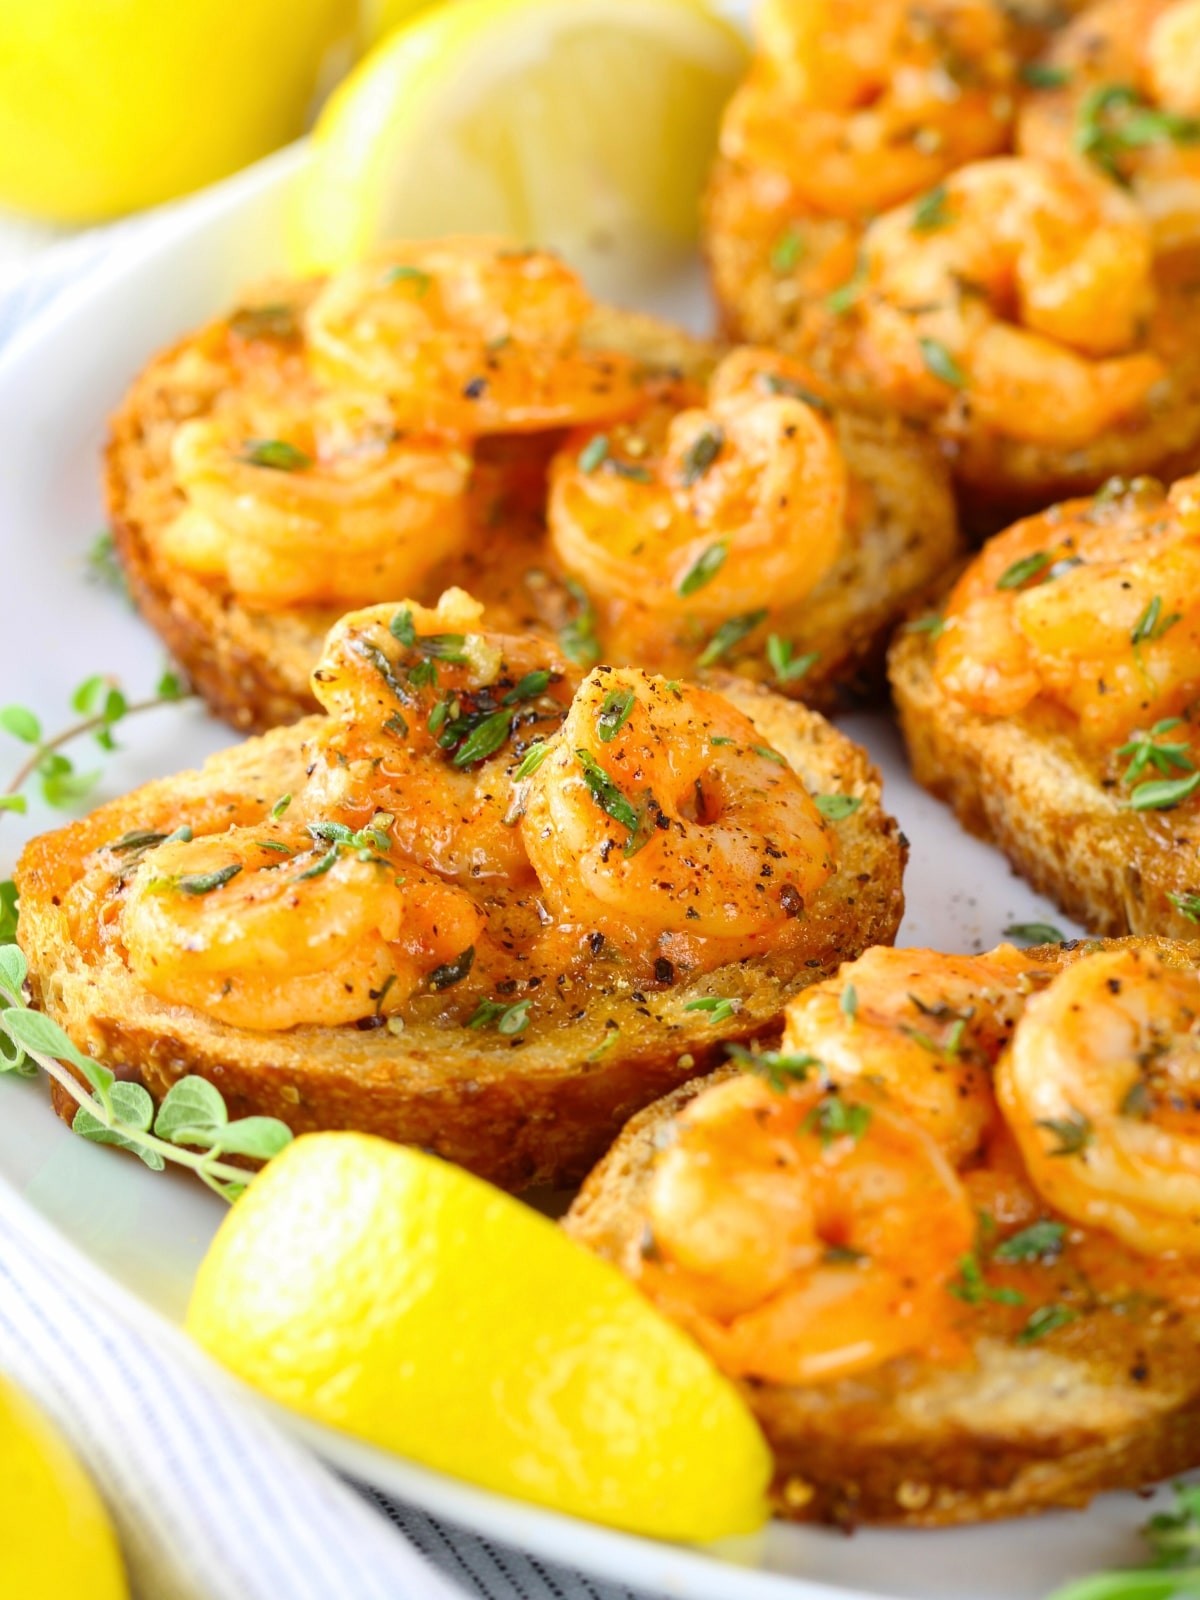 Easy appetizers - Easy Cajun Shrimp Toast Appetizers with lemon wedges on a platter.